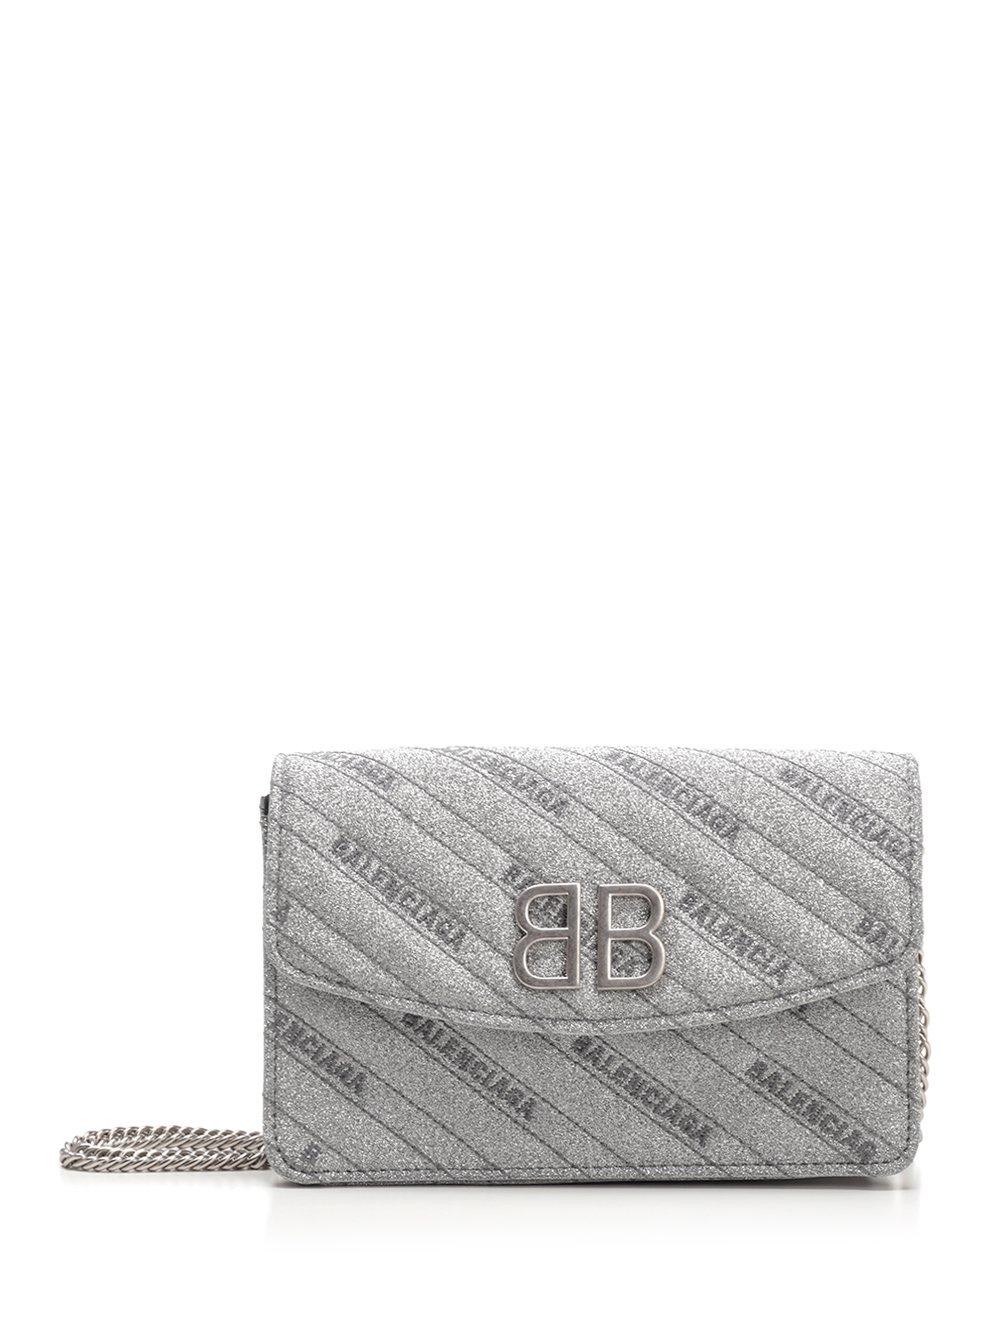 Balenciaga Bb Silver Glittered Leather Wallet on Chain Bag 561507